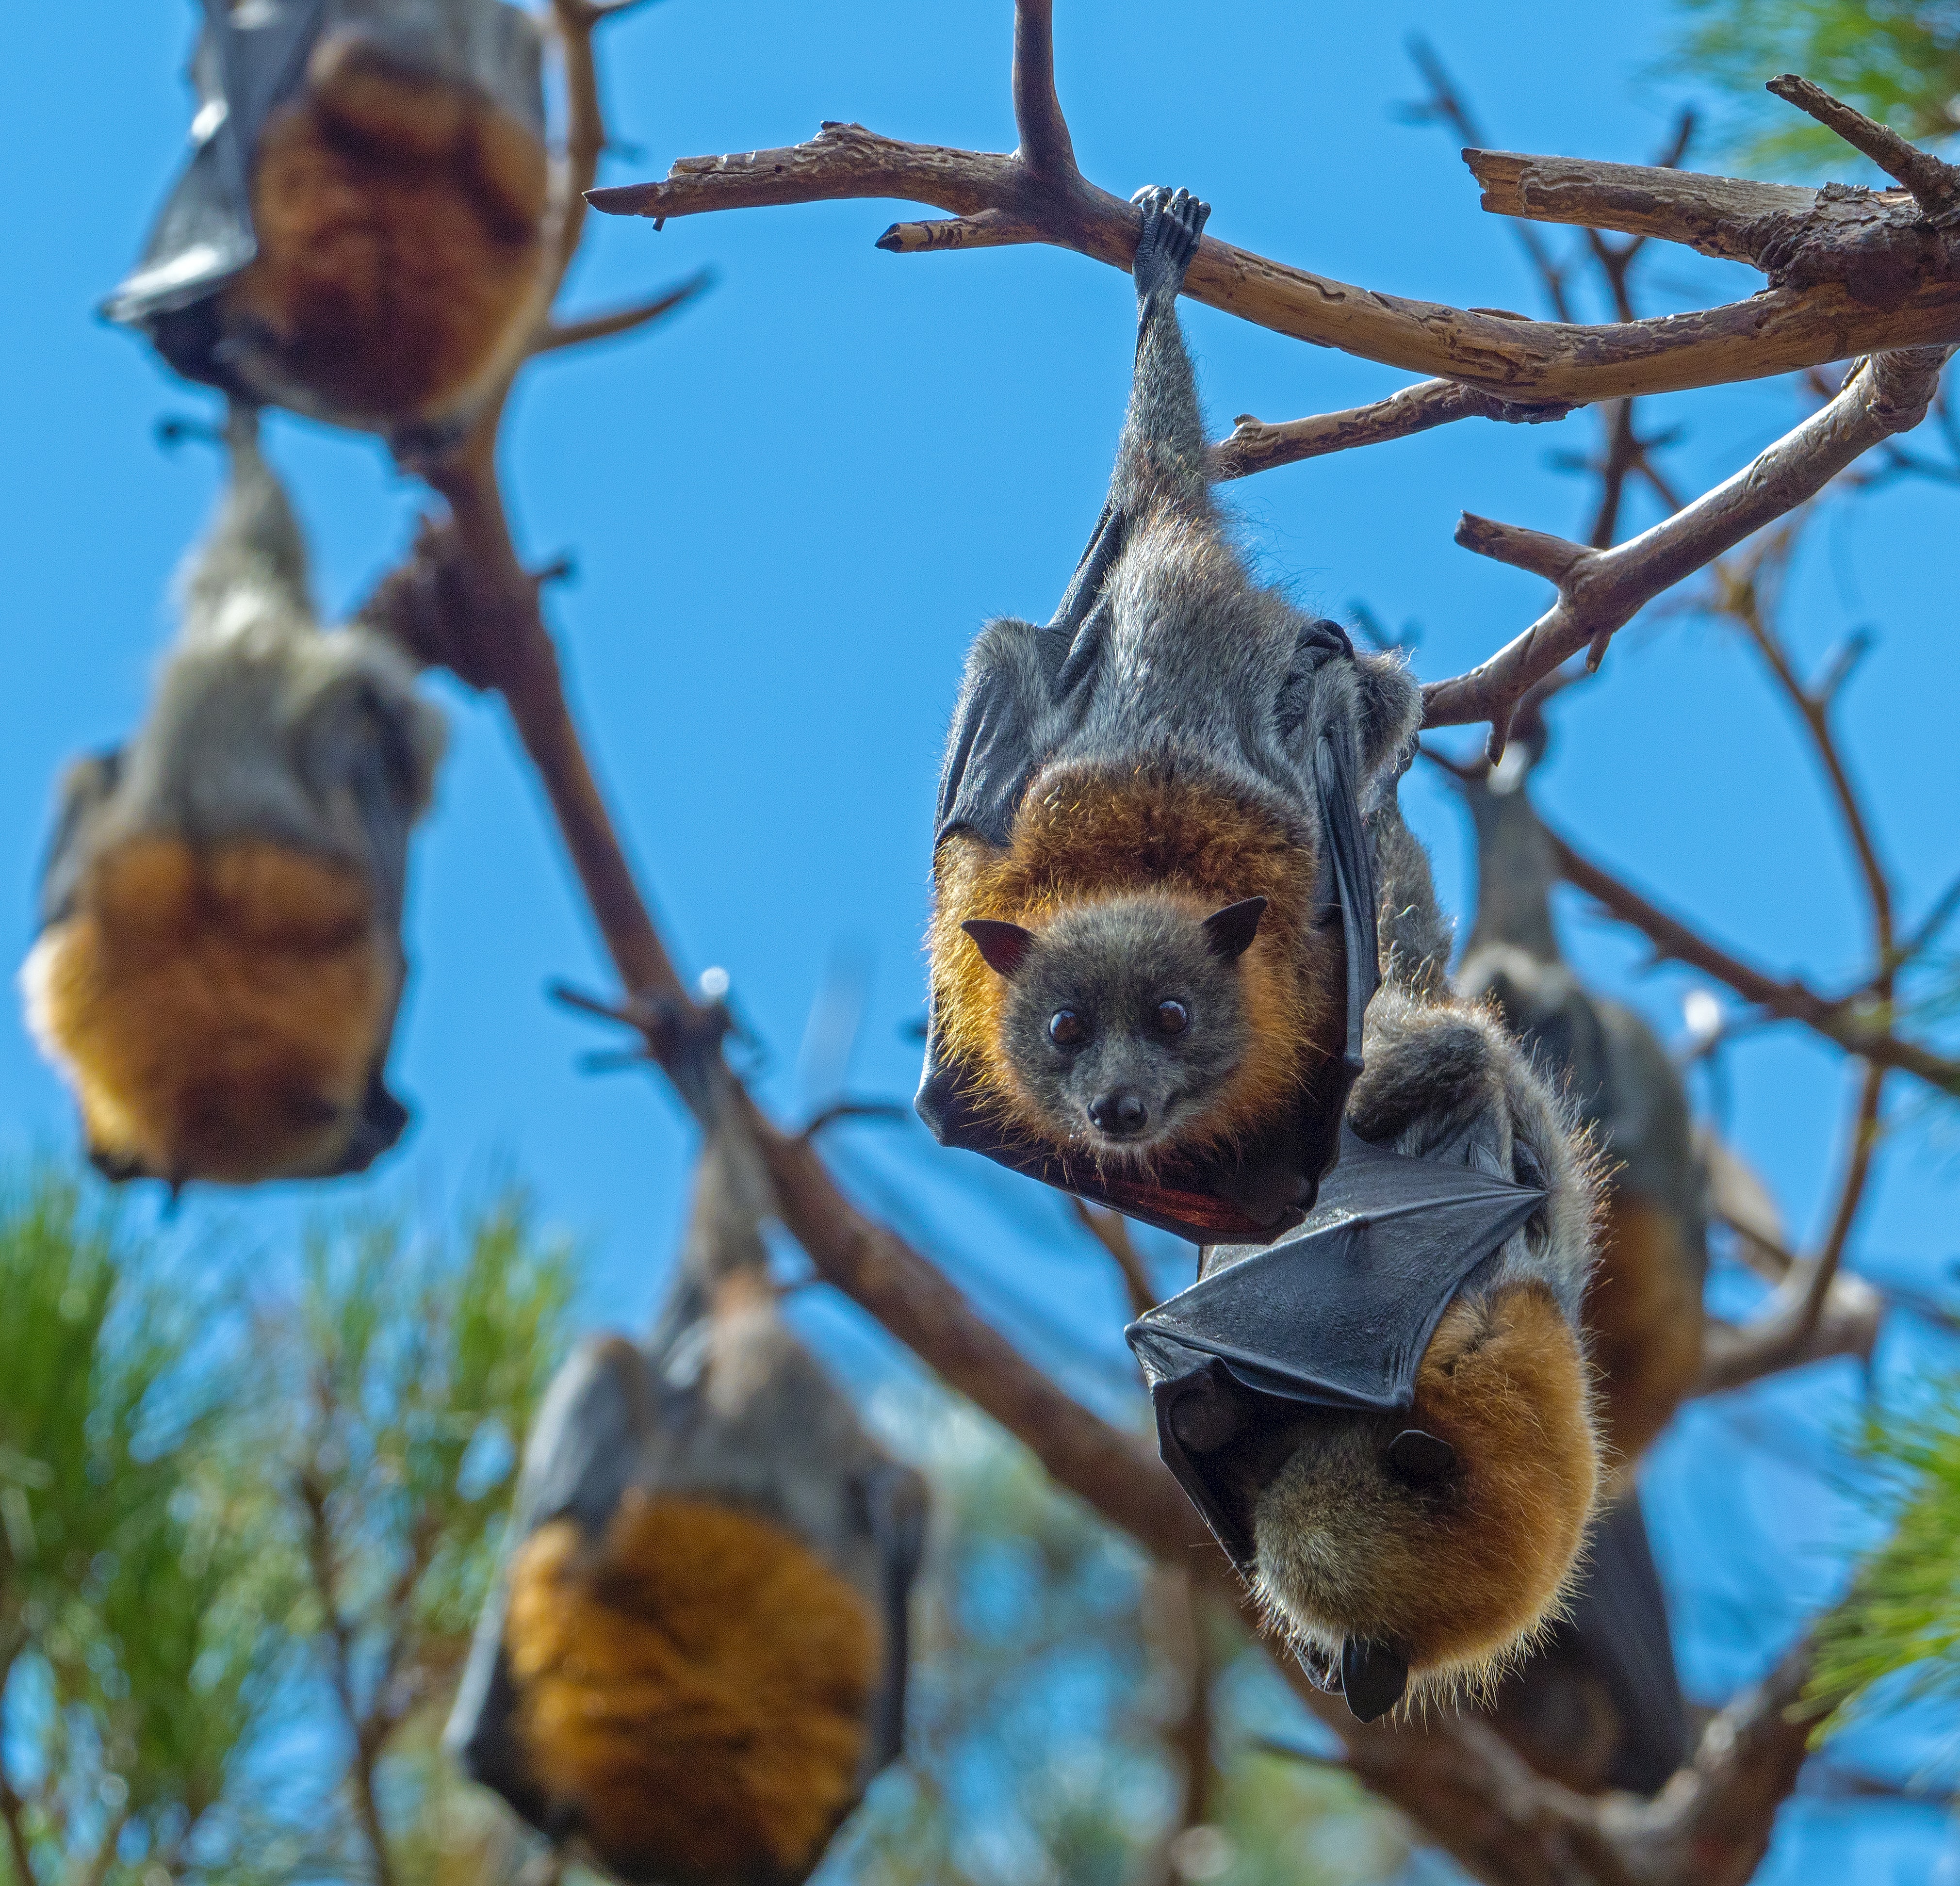 Bats Hanging from a Tree from Rene Riegal on Unsplash